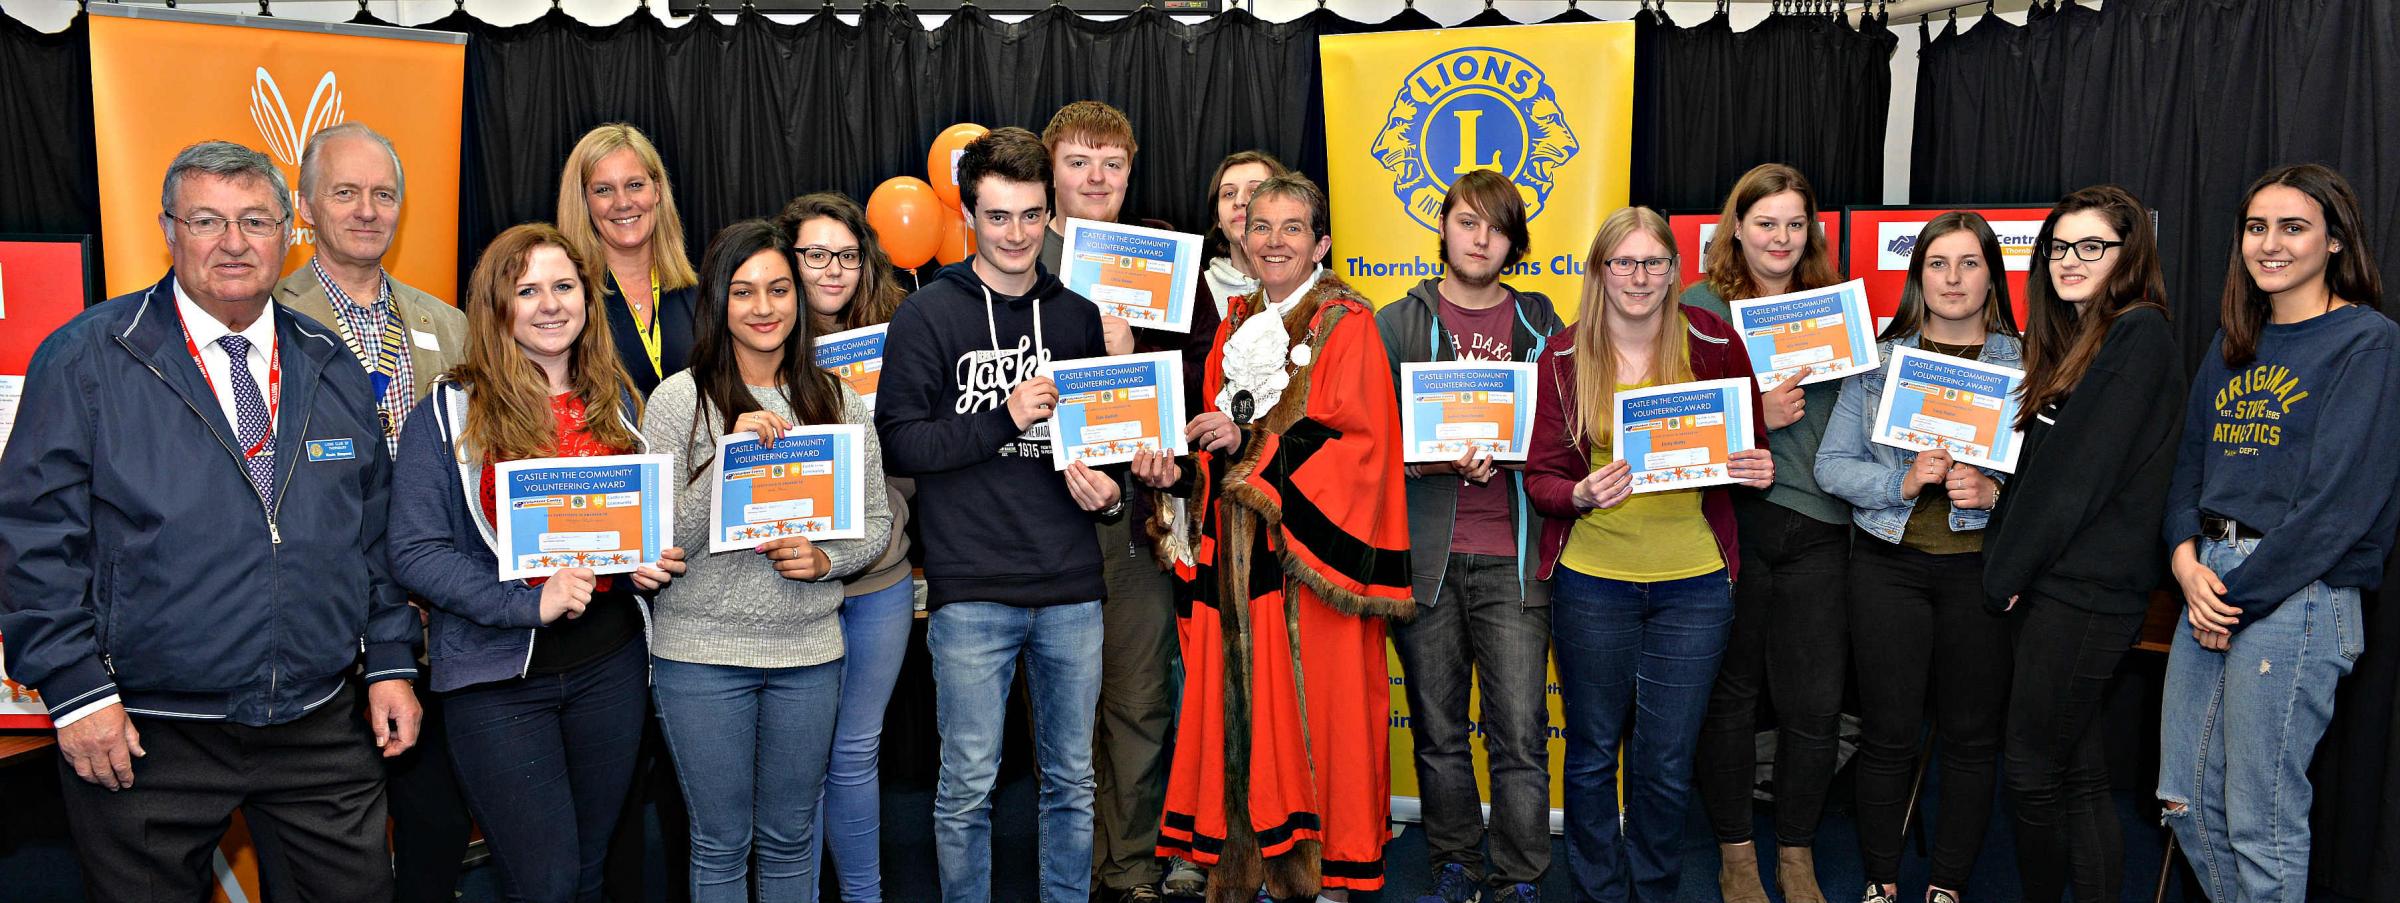 Castle School sixth formers celebrated for months of community work in Thornbury - Gazette Series